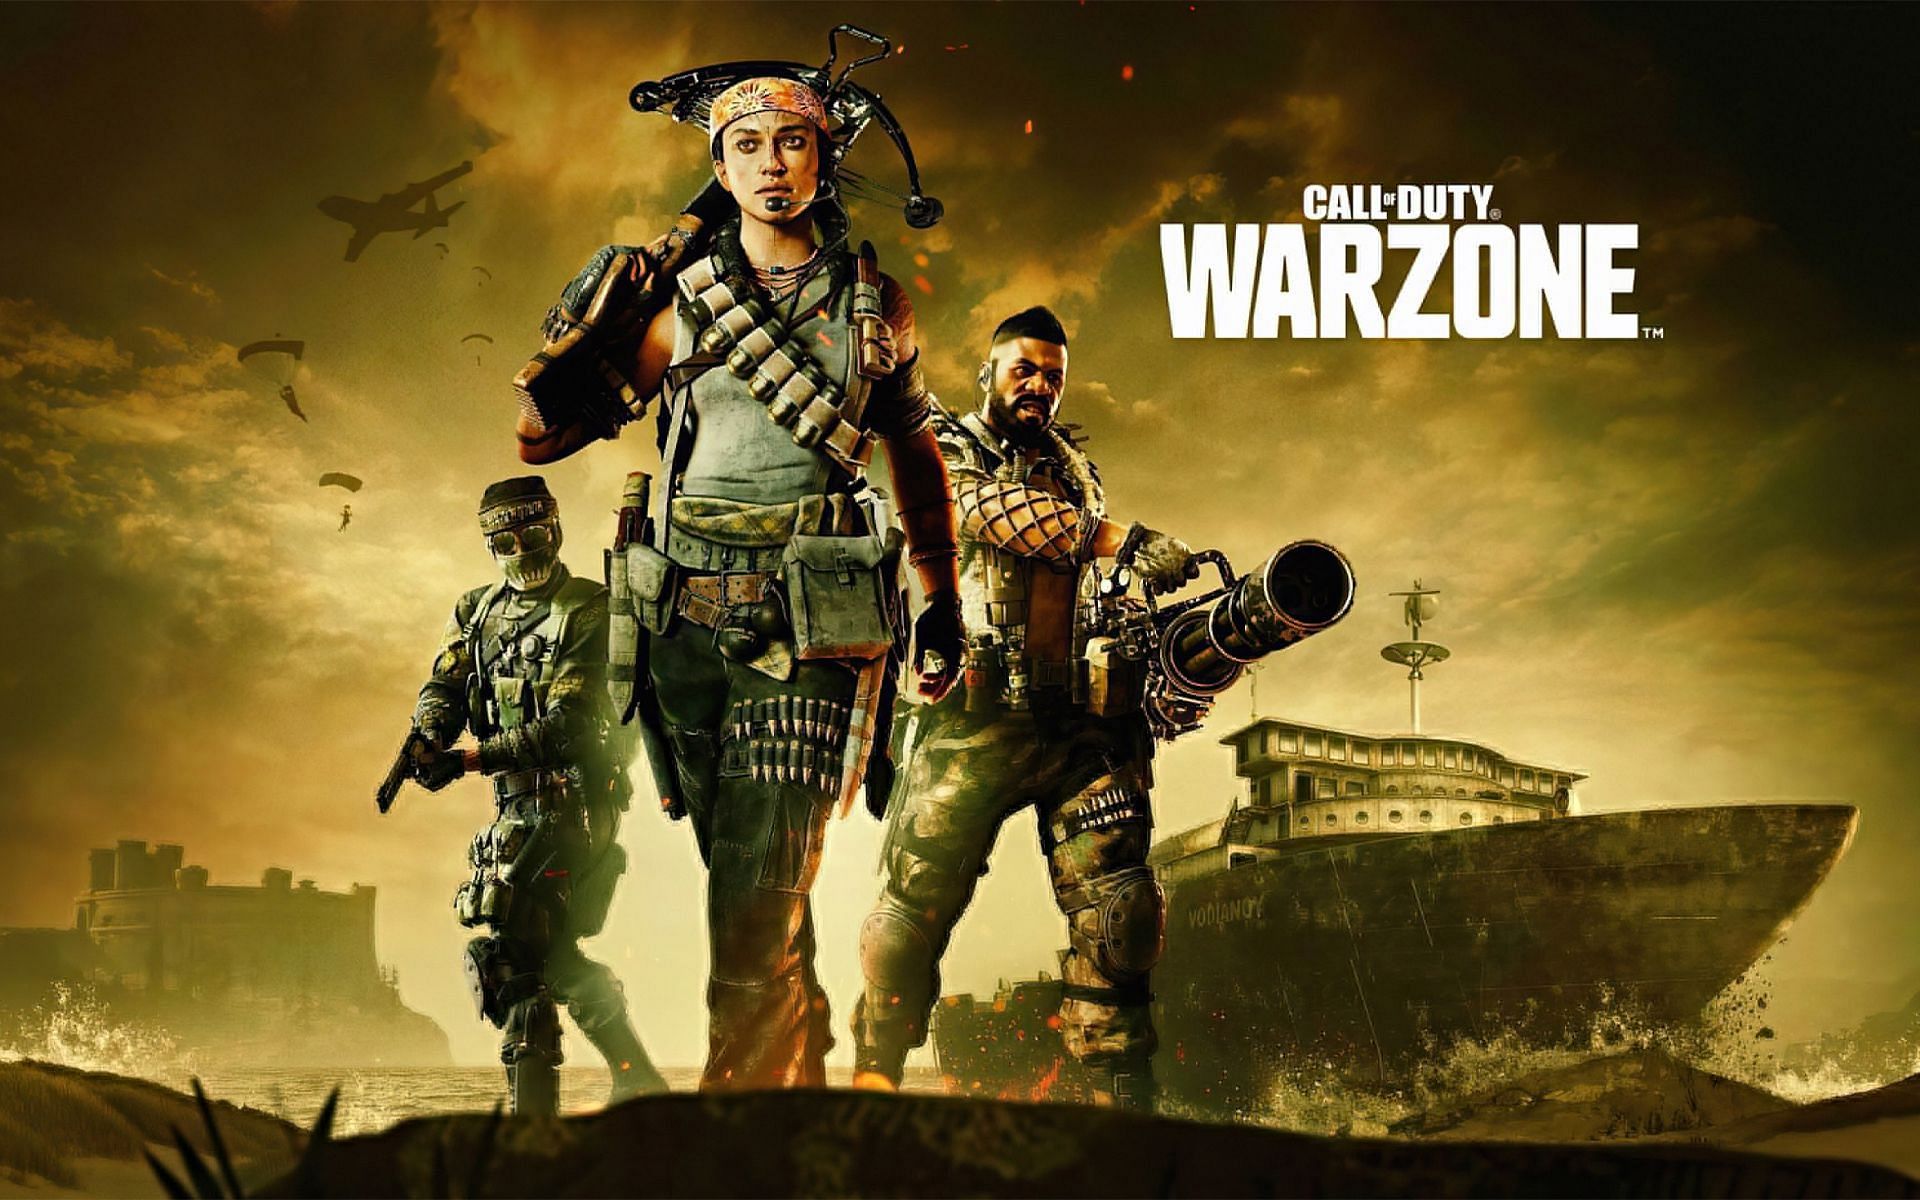 New Weapon Trading System coming to Call of Duty Warzone (Image via Activision)